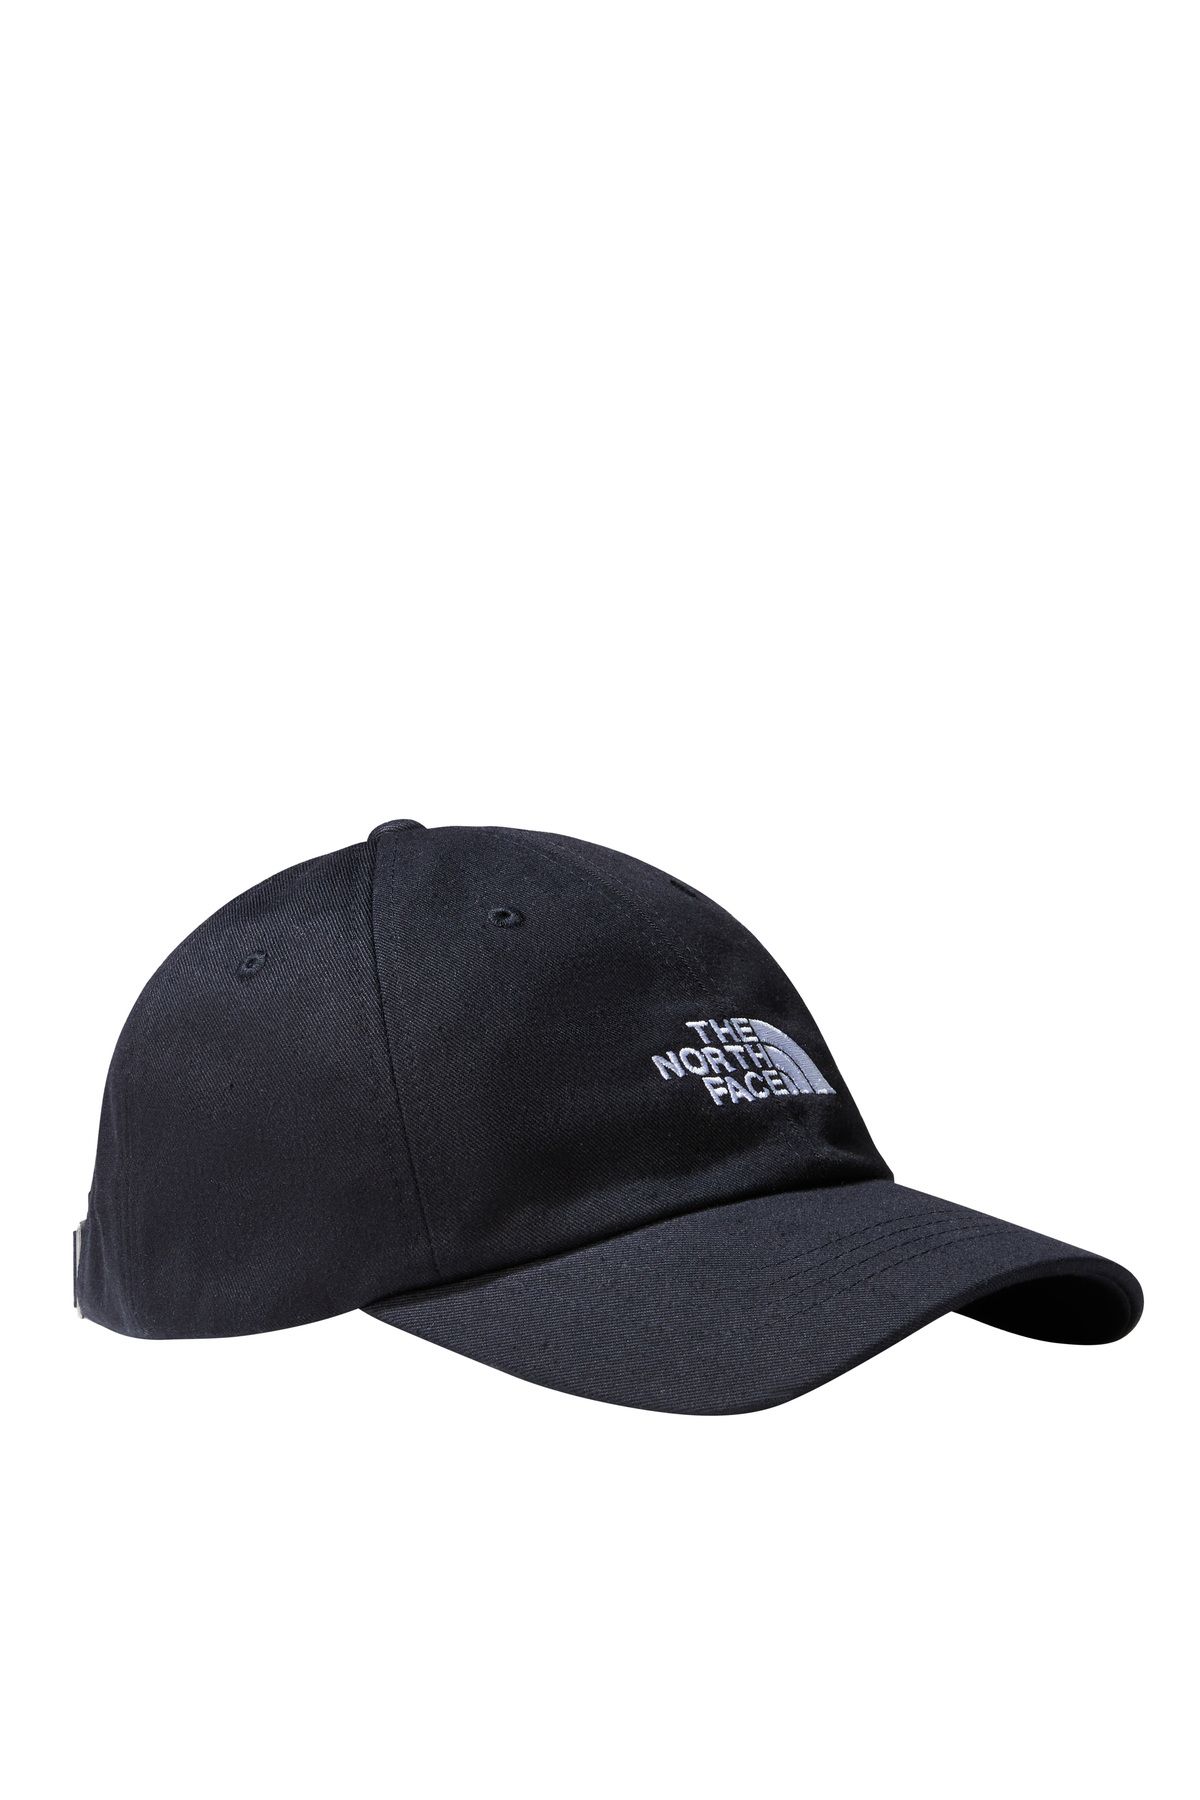 The North Face Norm Hat Unisex Siyah Şapka Nf0a7whojk31